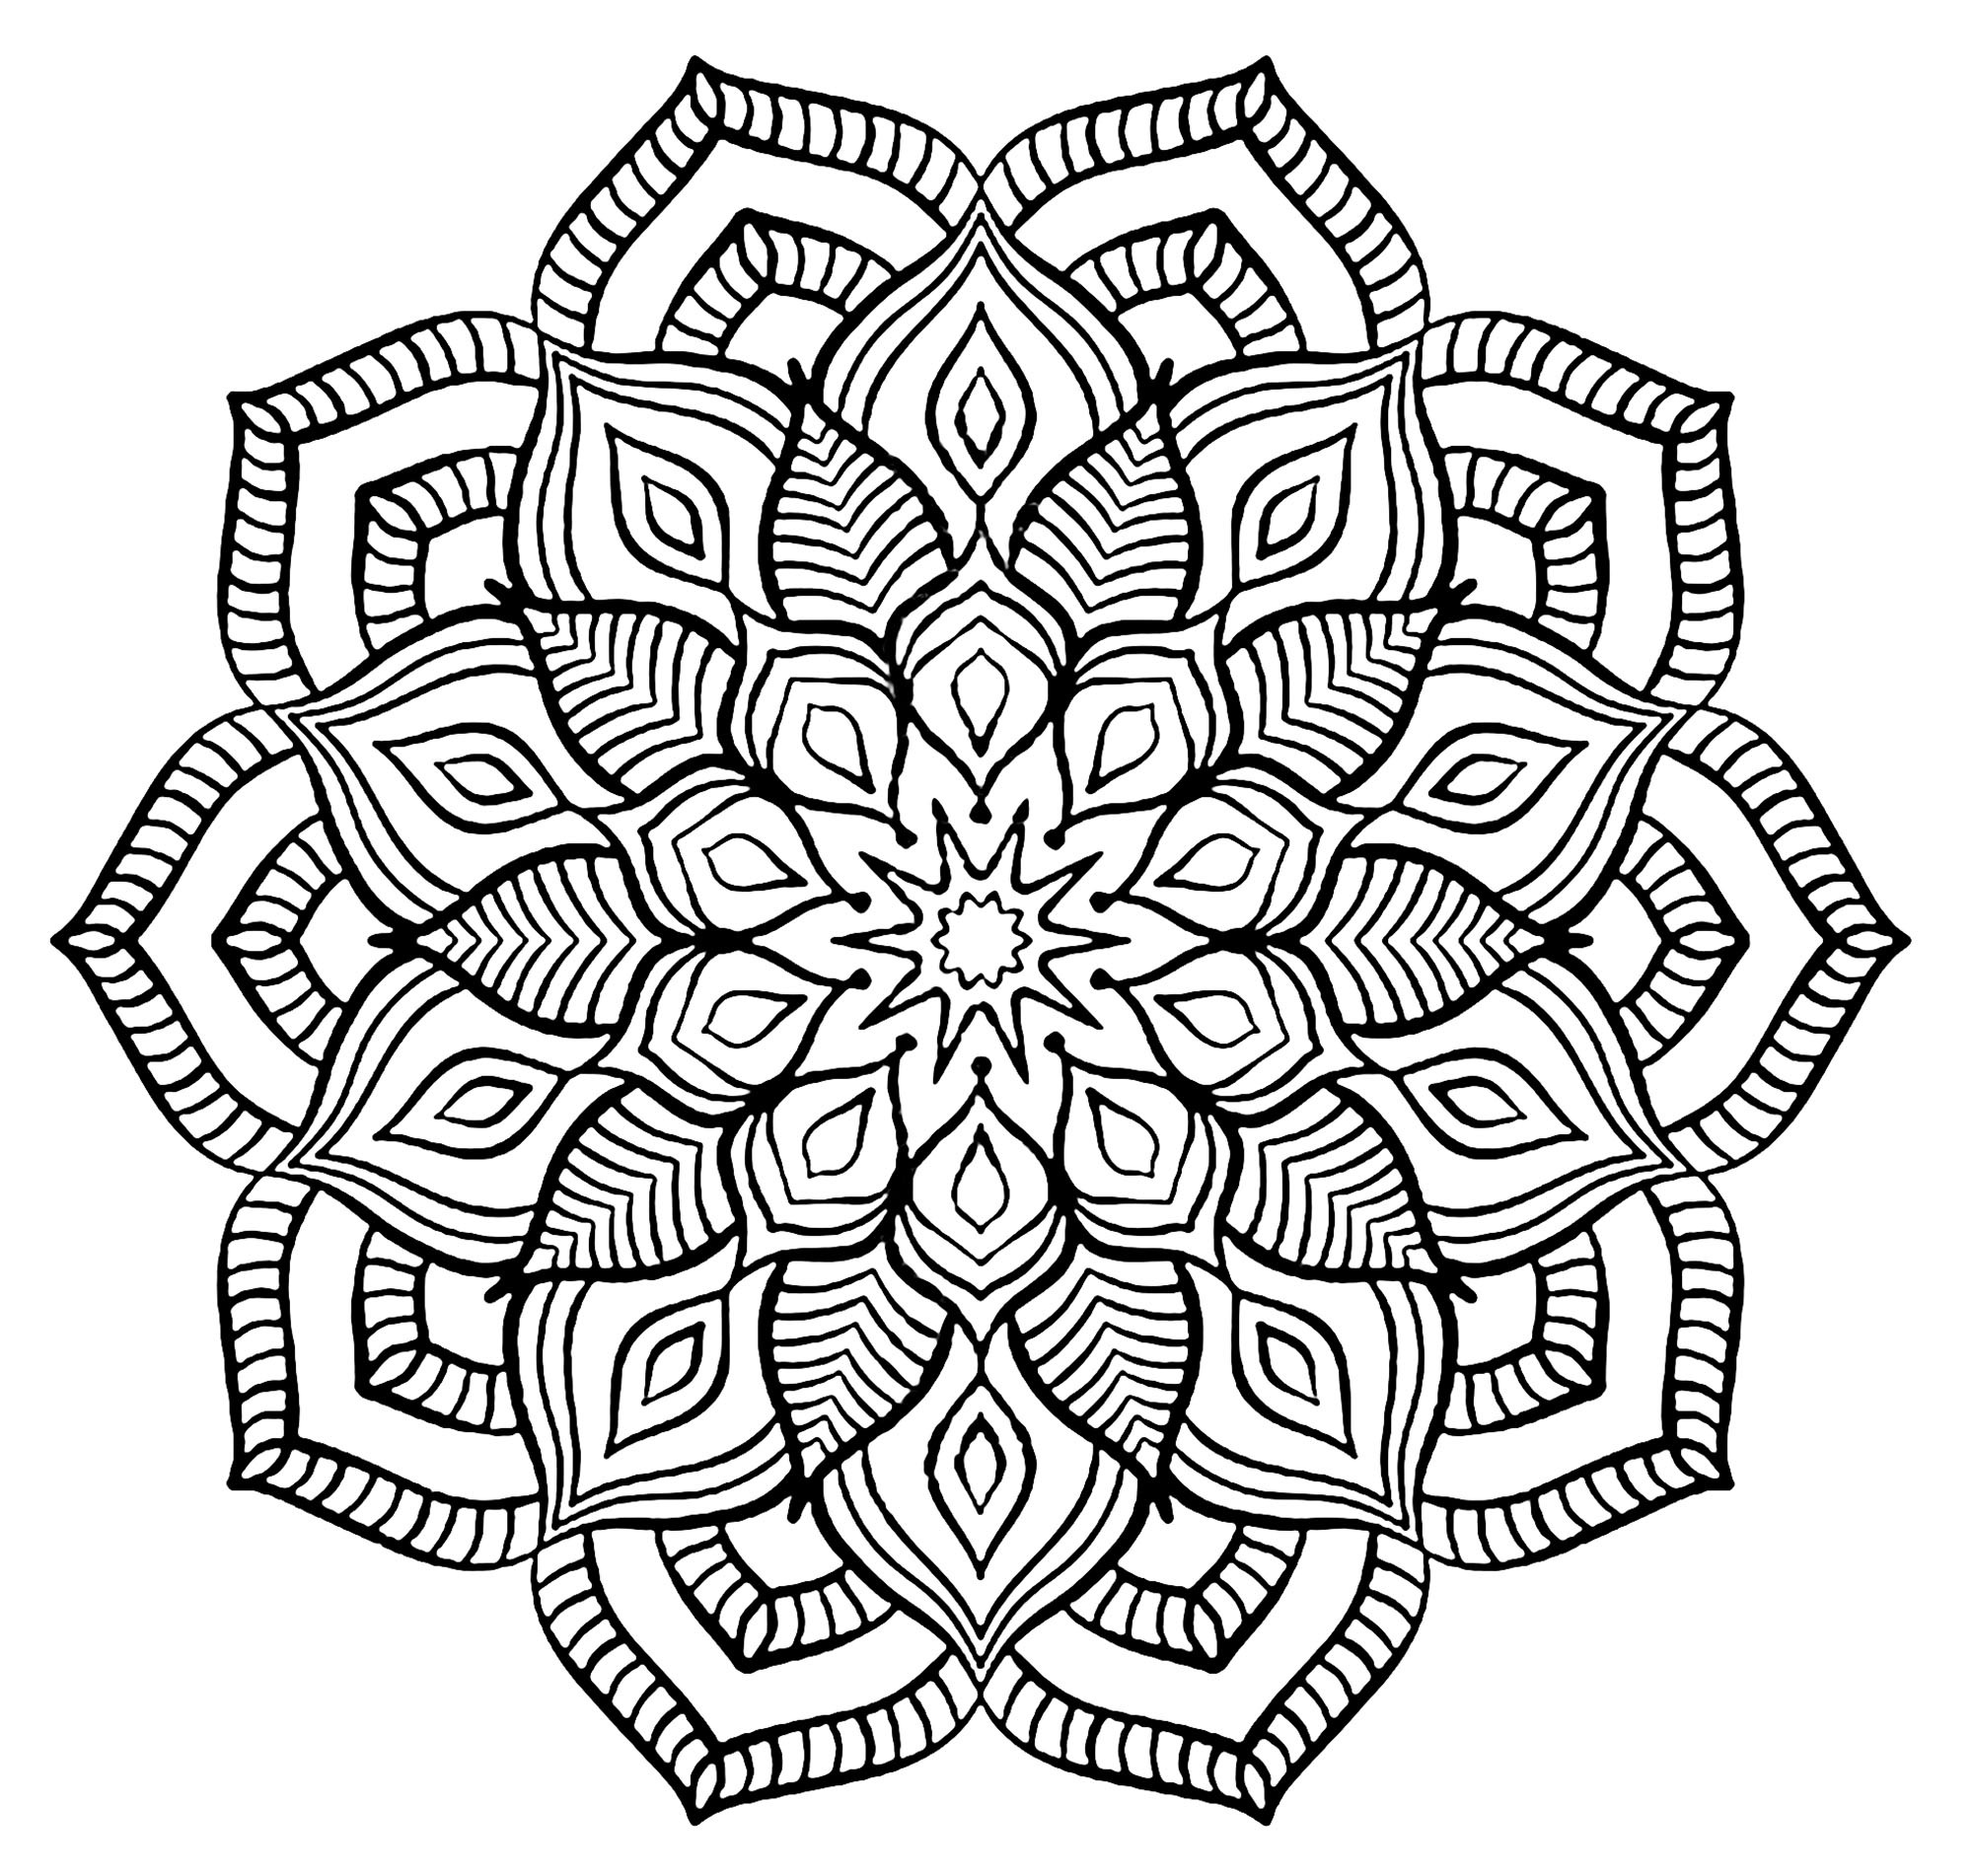 Big flower. Prepare your most beautiful shades of green and other colors to color this beautiful and exclusive coloring page, special for lovers of Mandalas and Nature ! Large and harmonious lines.